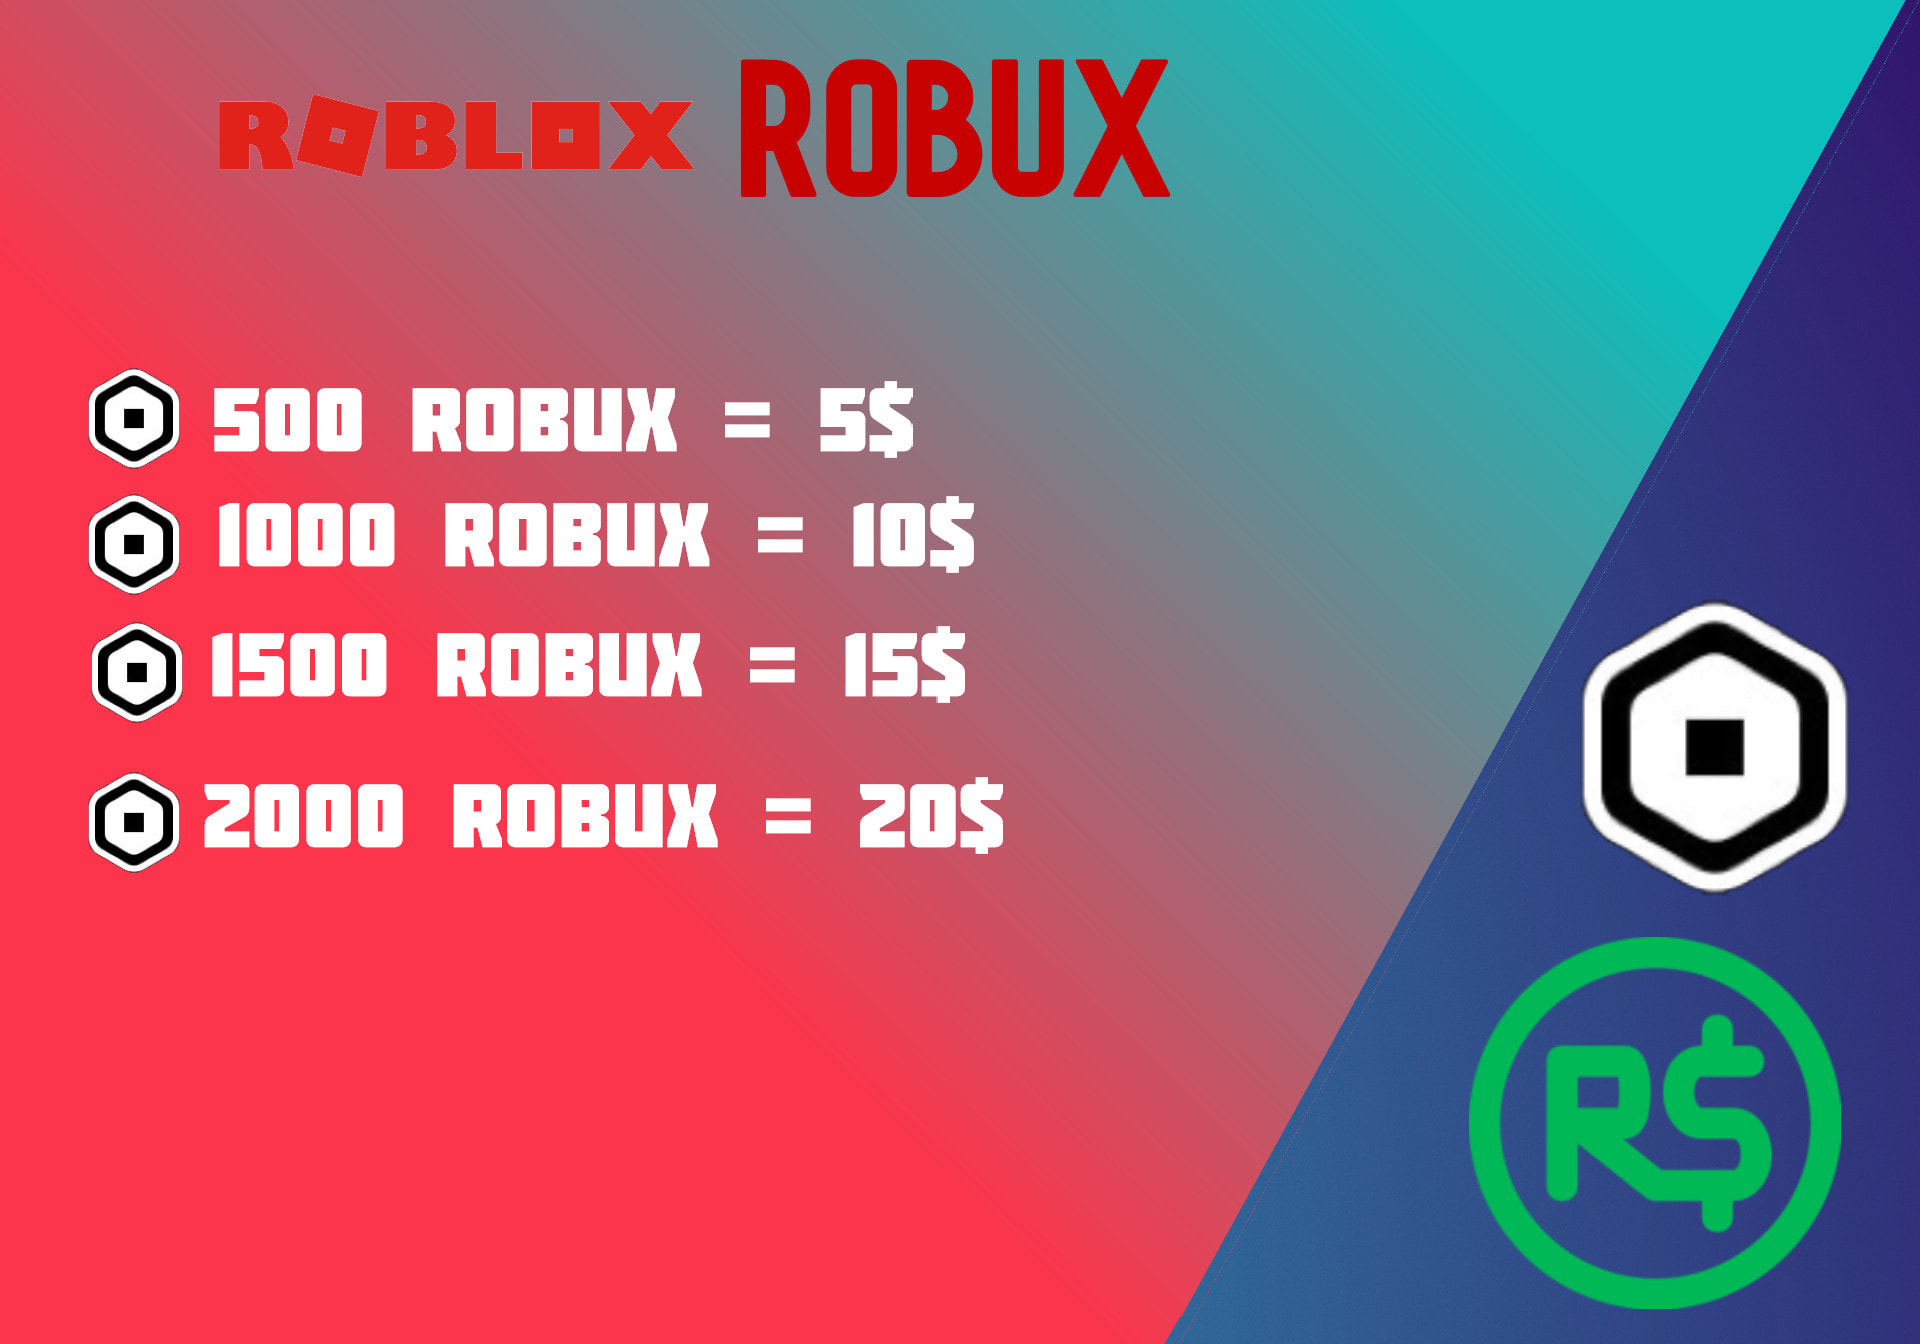 Sell Robux For Who Needs Robux Come Buy This By Dragontecz Fiverr - roblox selling trading account for 500 robux